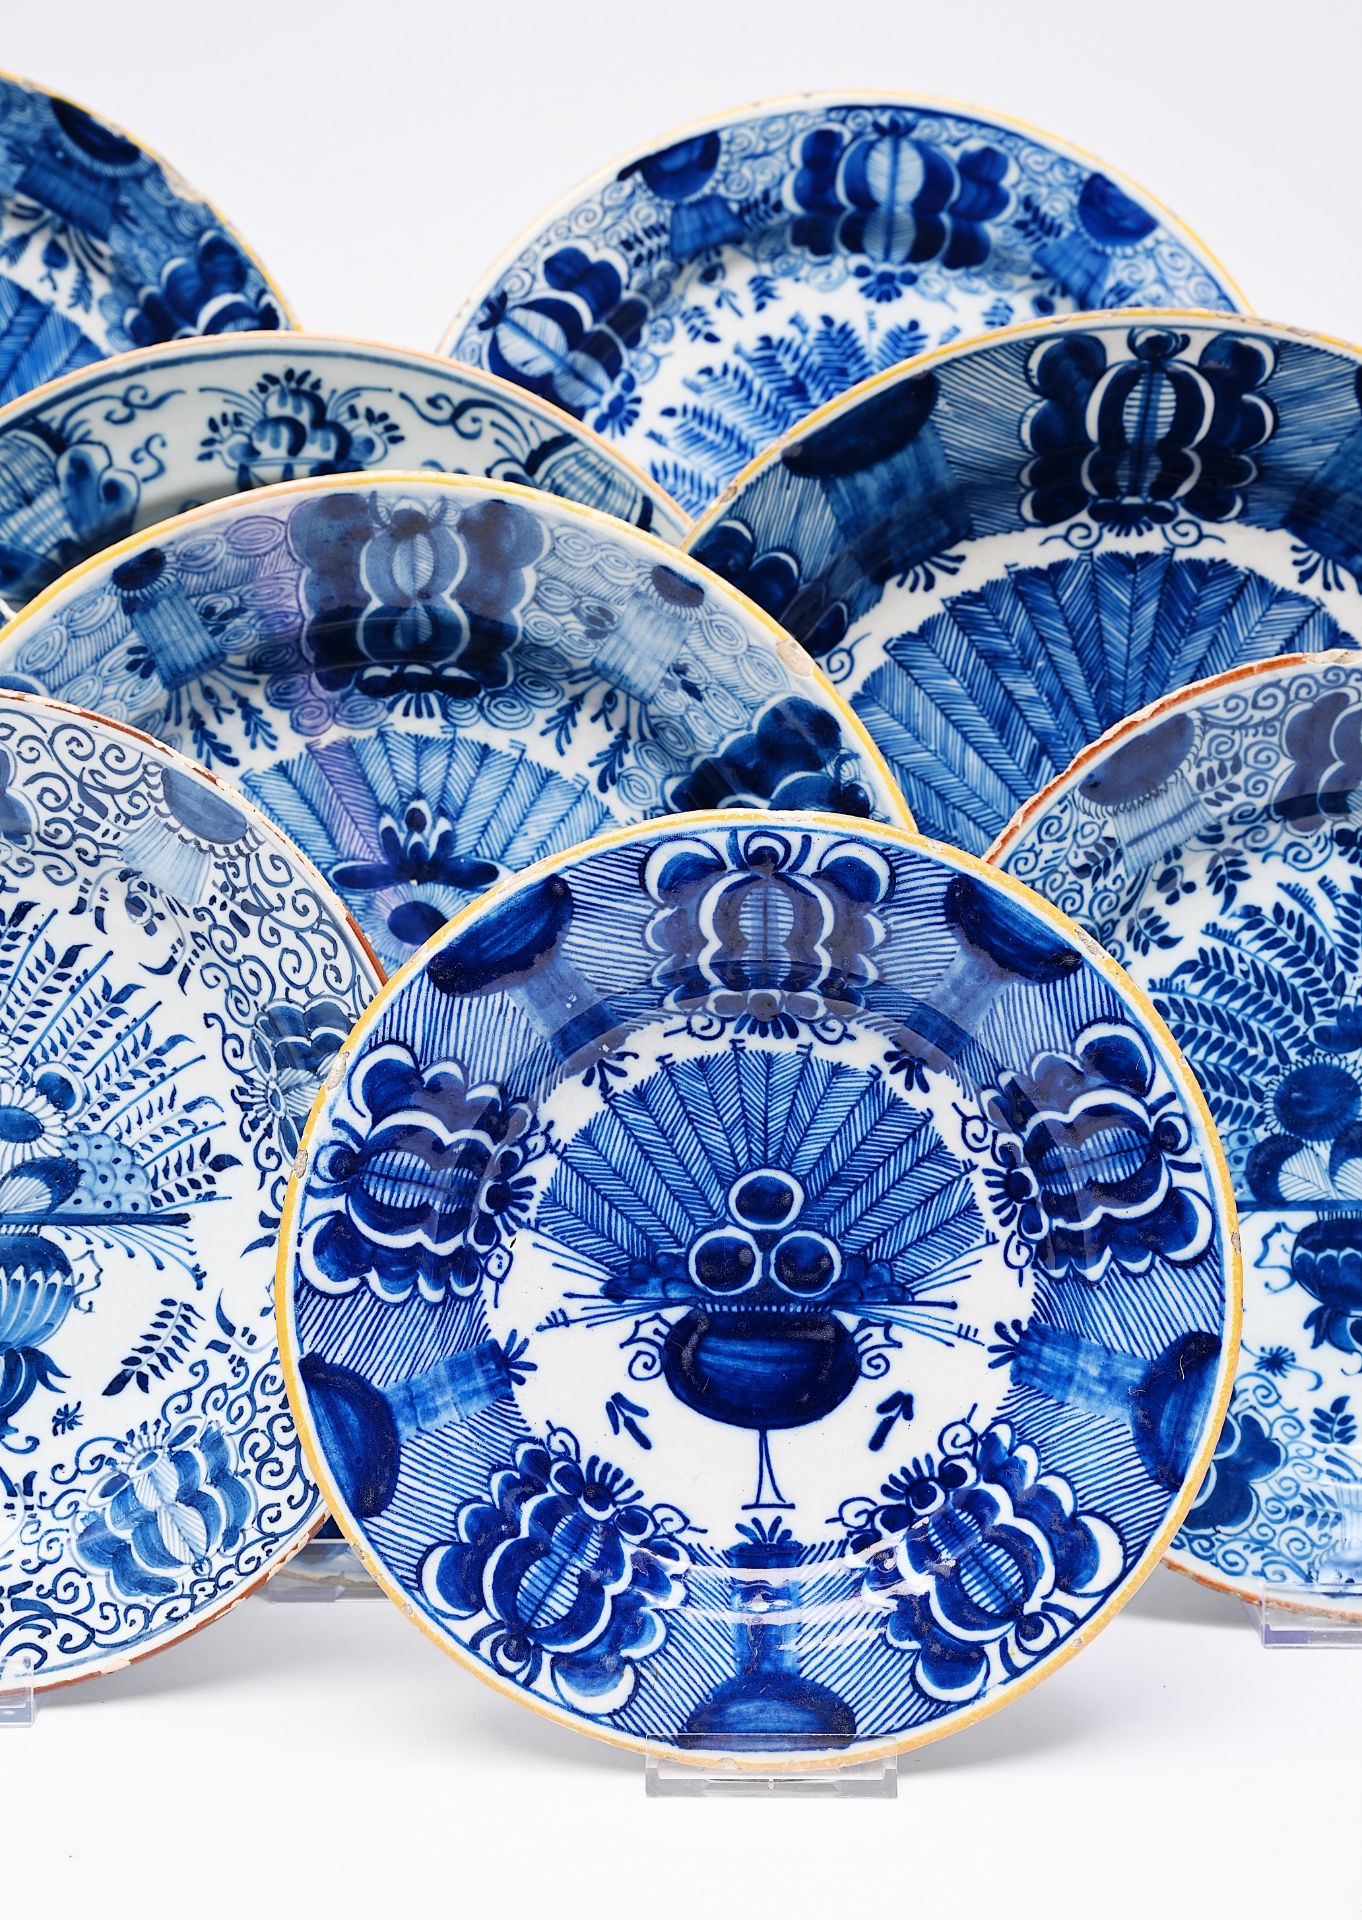 Sixteen Dutch Delft blue and white 'peacock tail' plates and dishes, 18th C. - Image 2 of 6